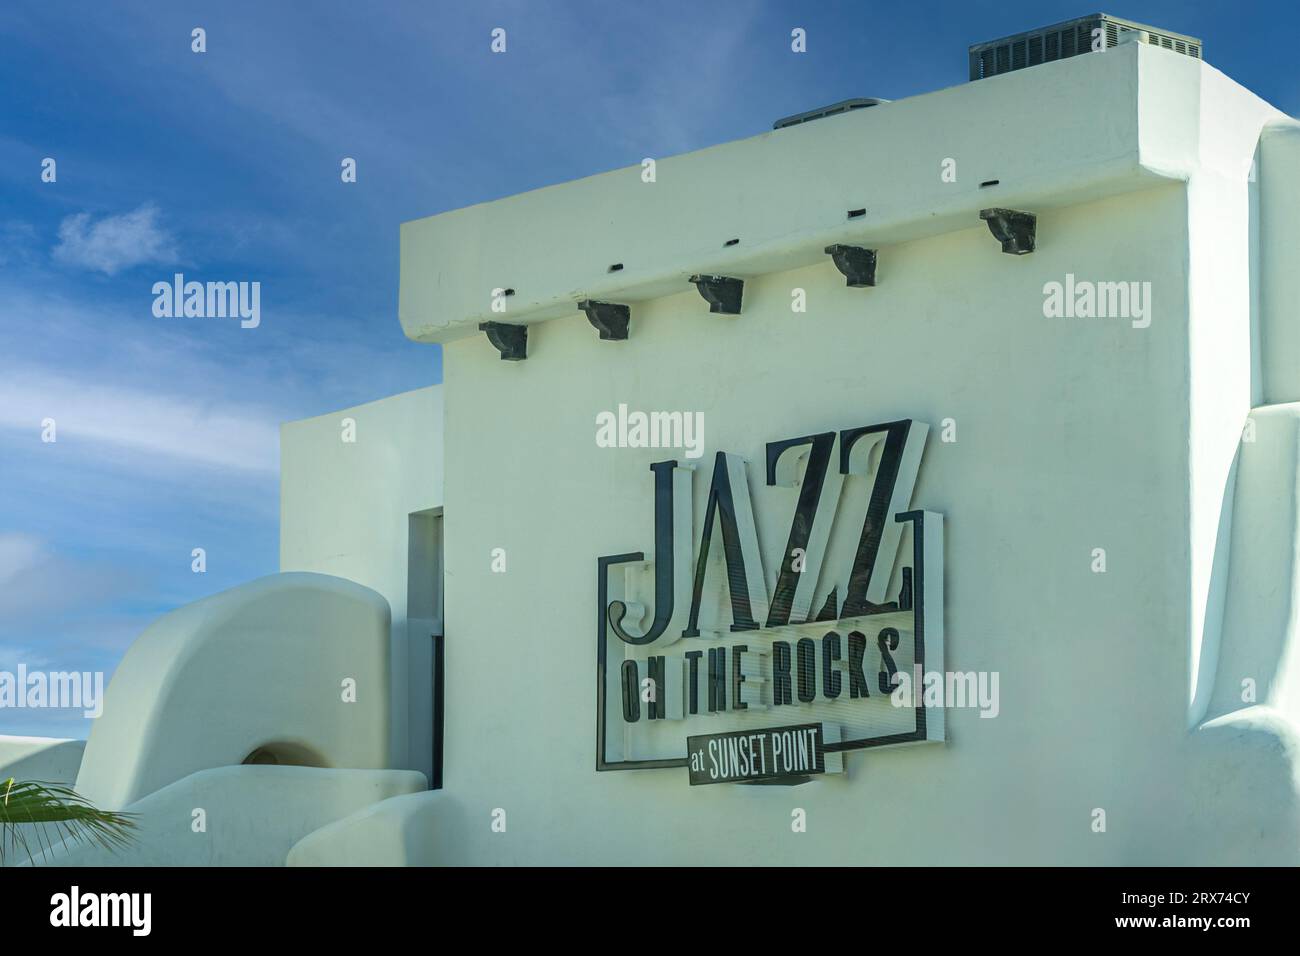 Mexico, Cabo San Lucas - July 16, 2023: Jazz on the Rocks at Sunset Point sign, black on white building wall under blue cloudscape Stock Photo